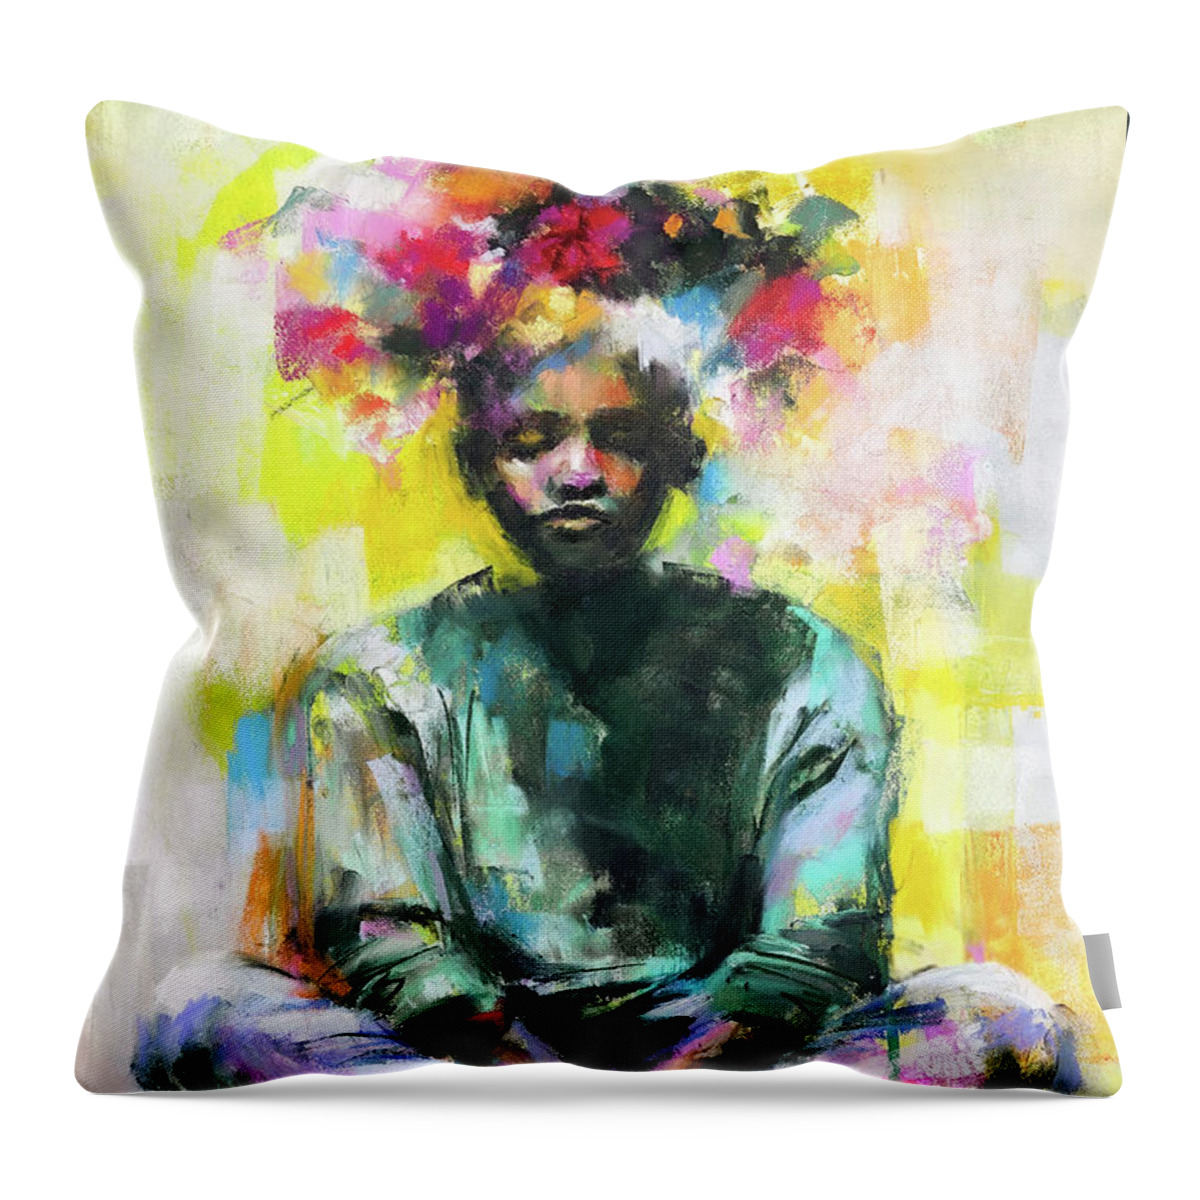 Soft Pastels Throw Pillow featuring the painting Blooming Youth by Luzdy Rivera